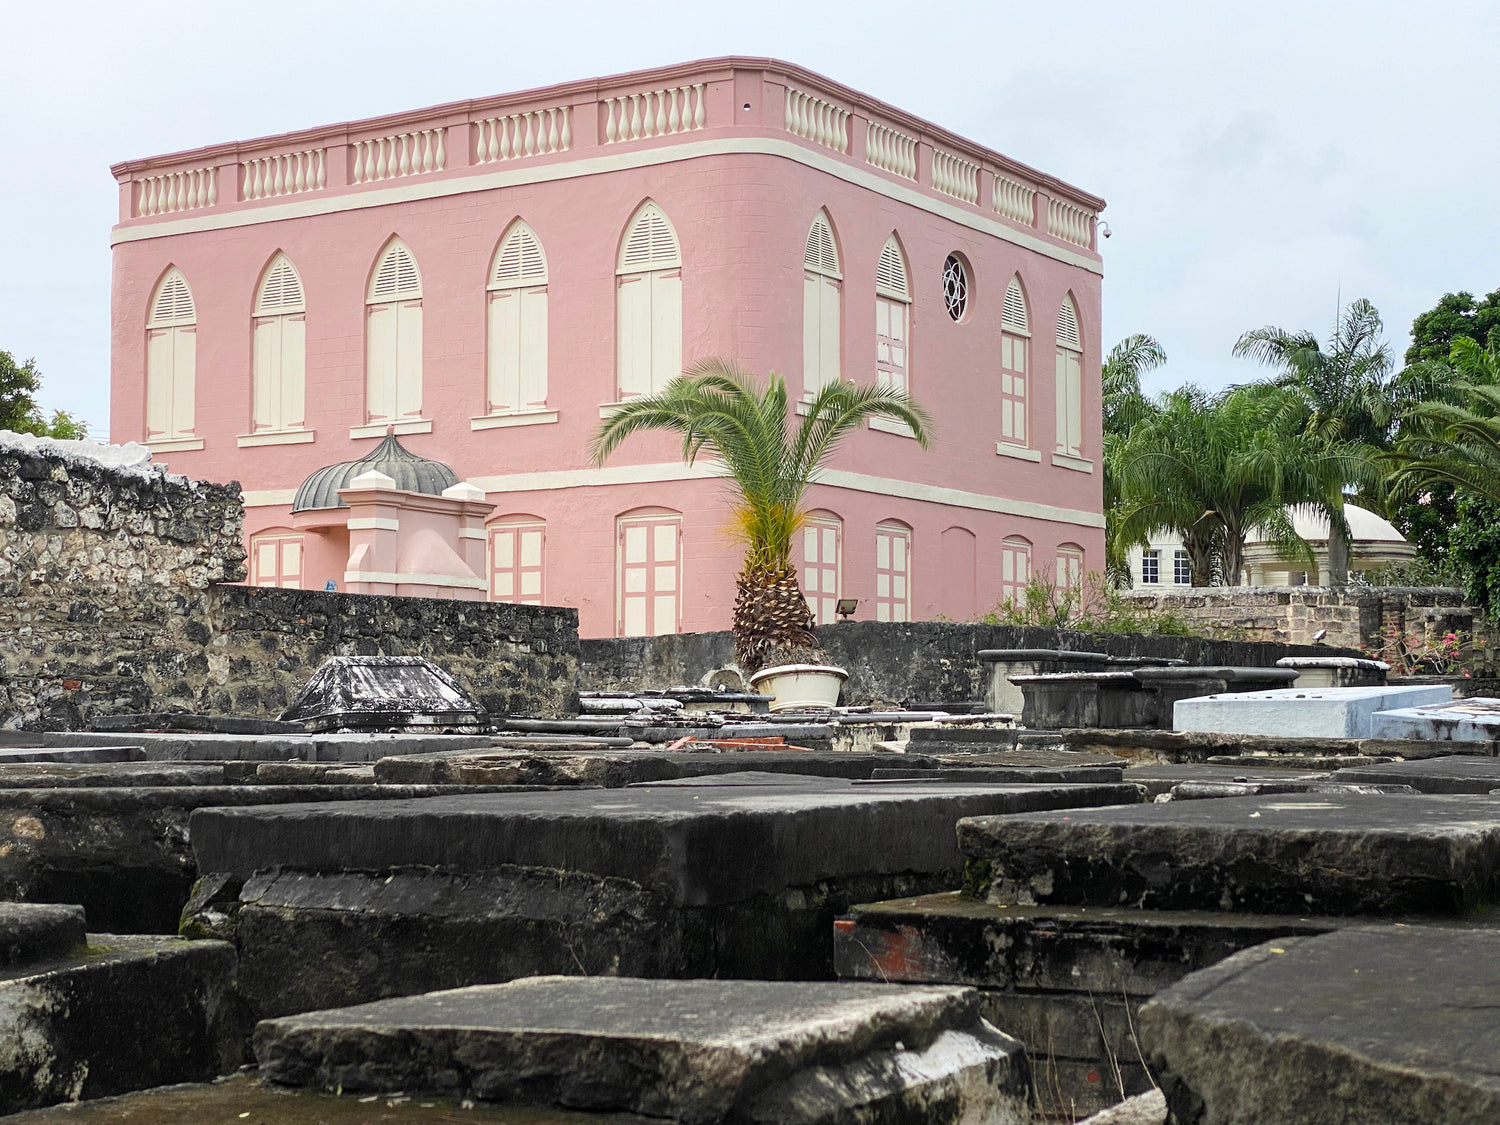 Learn about the history of oldest Synagogue in the western hemisphere, the Nidhe Israel Synagogue in Barbados with a guided tour.